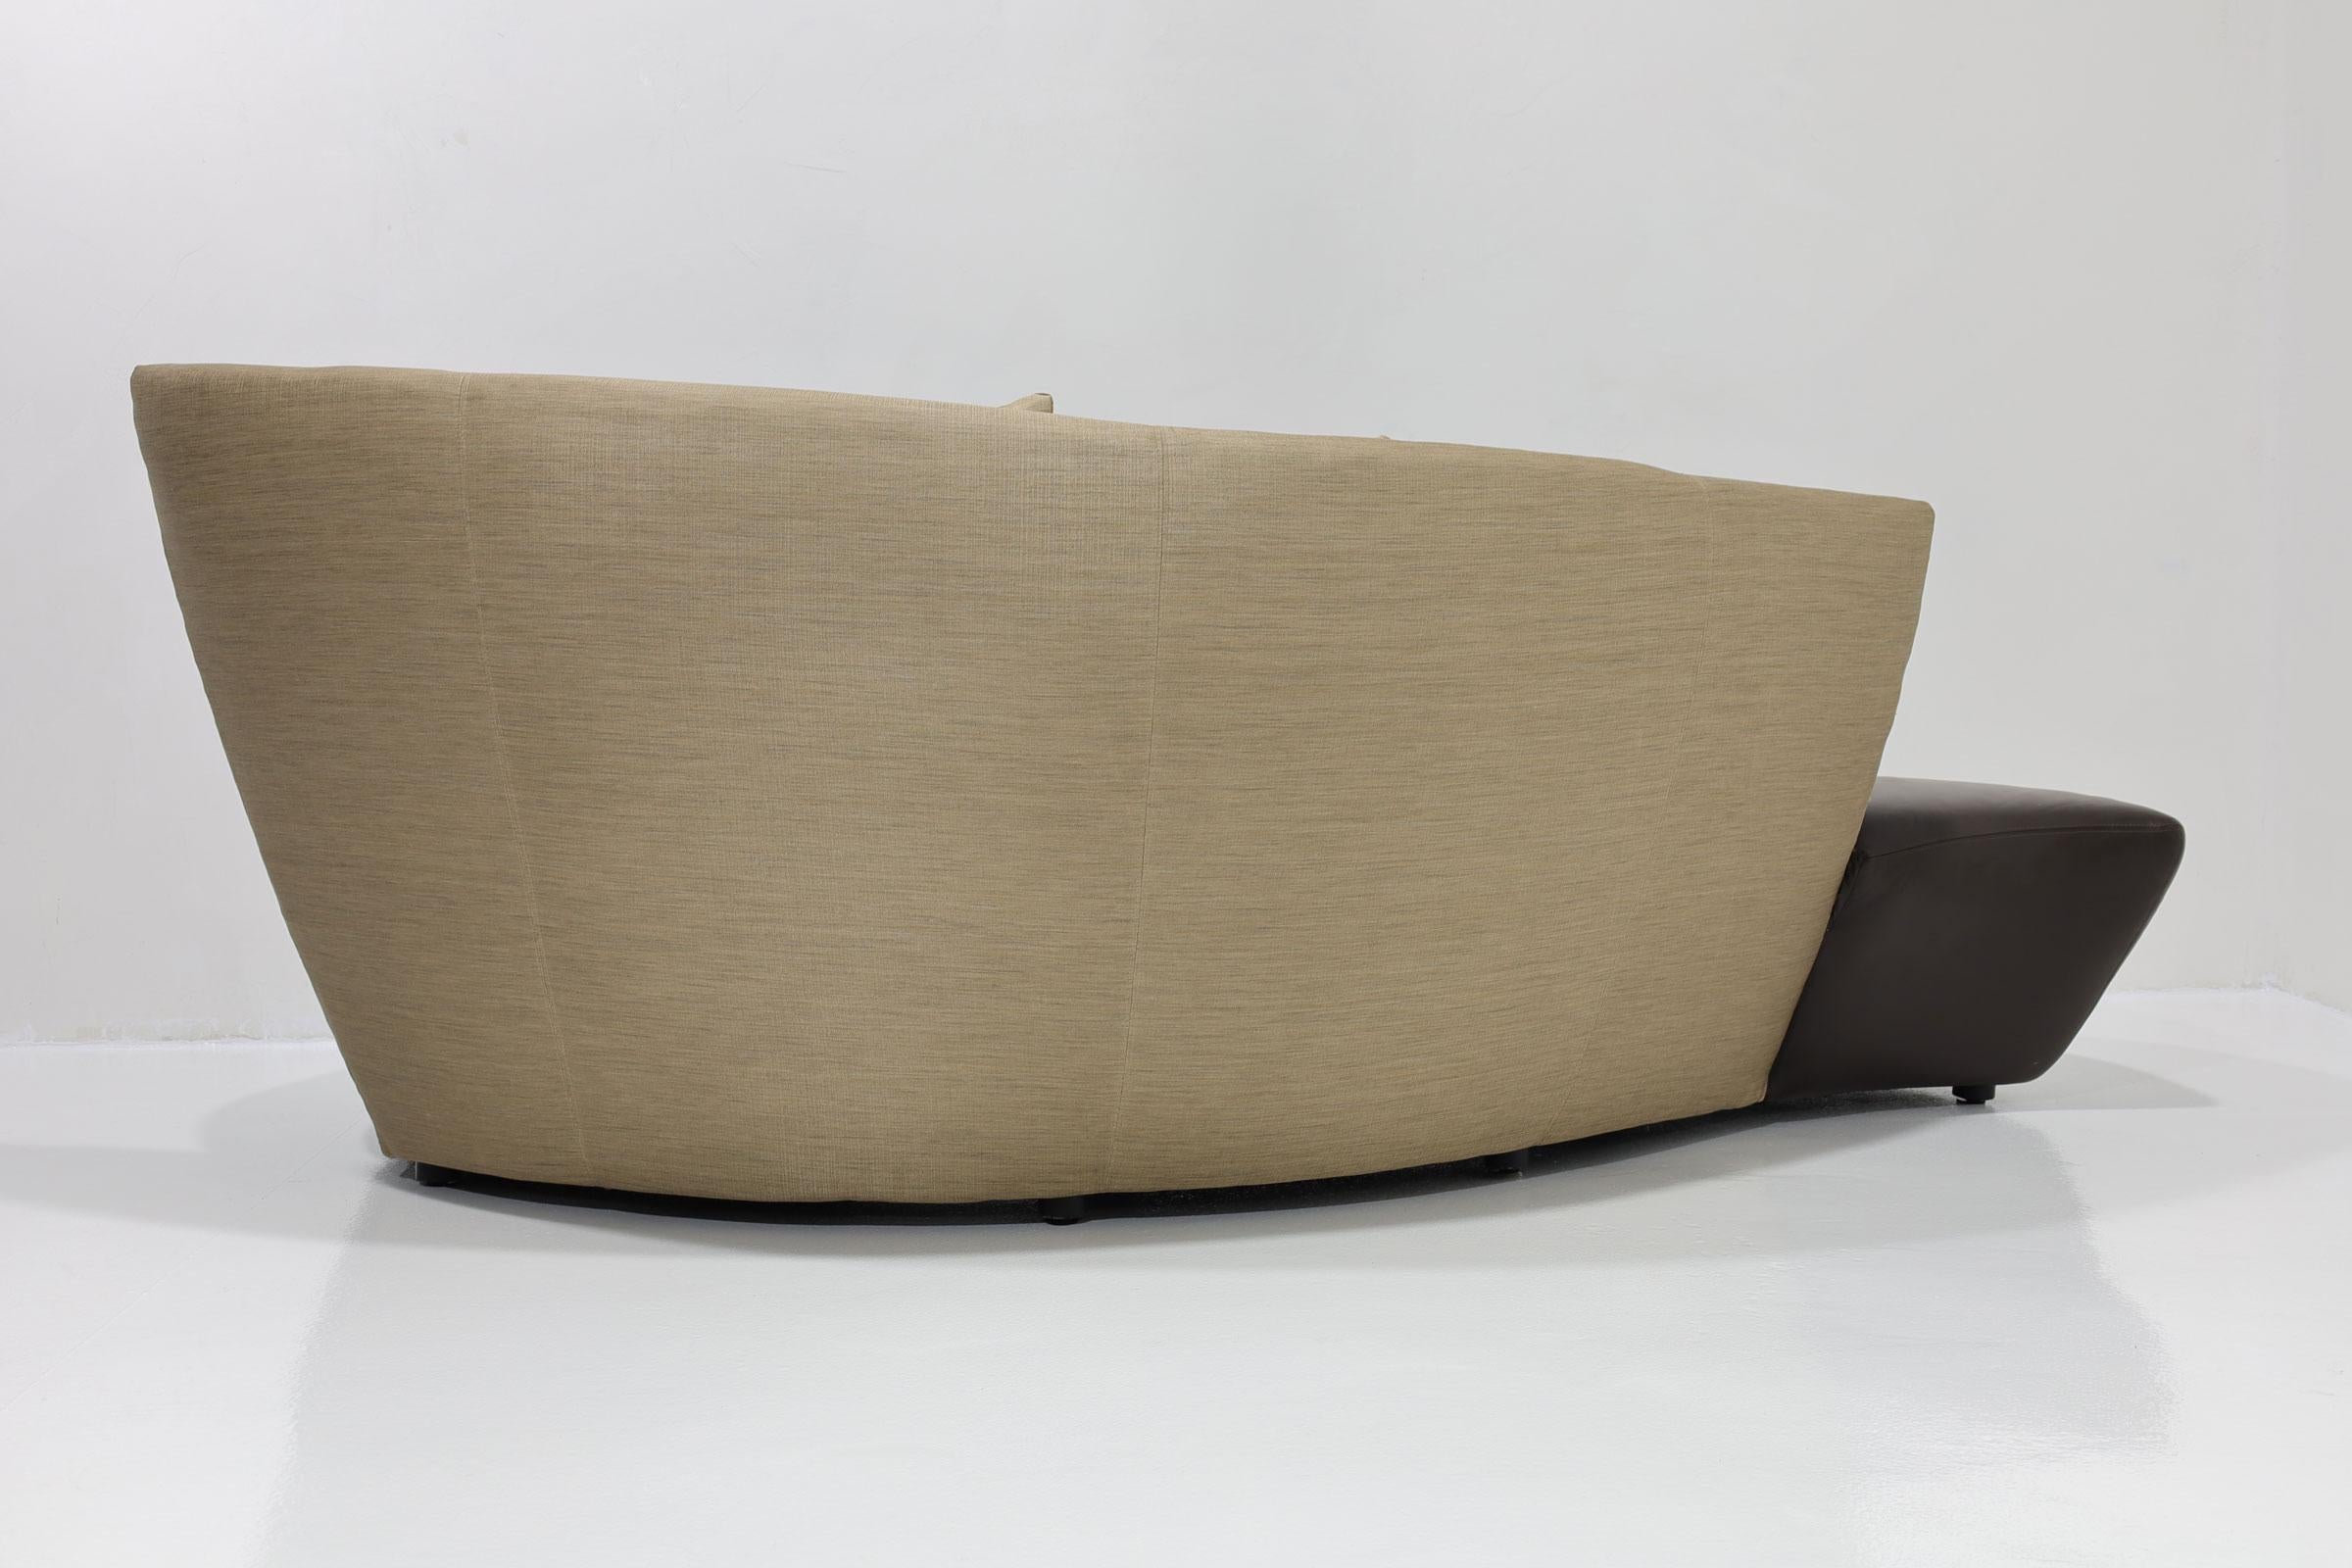 A Post Modern  Vladimir Kagan Bilbao sofa upholstered in silk and leather circa 1990s. Enamored with Bilbao, Spain, the Bilbao chair is a manifestation of Vladimir Kagan's impressions from his time spent on holiday. He was especially inspired by the